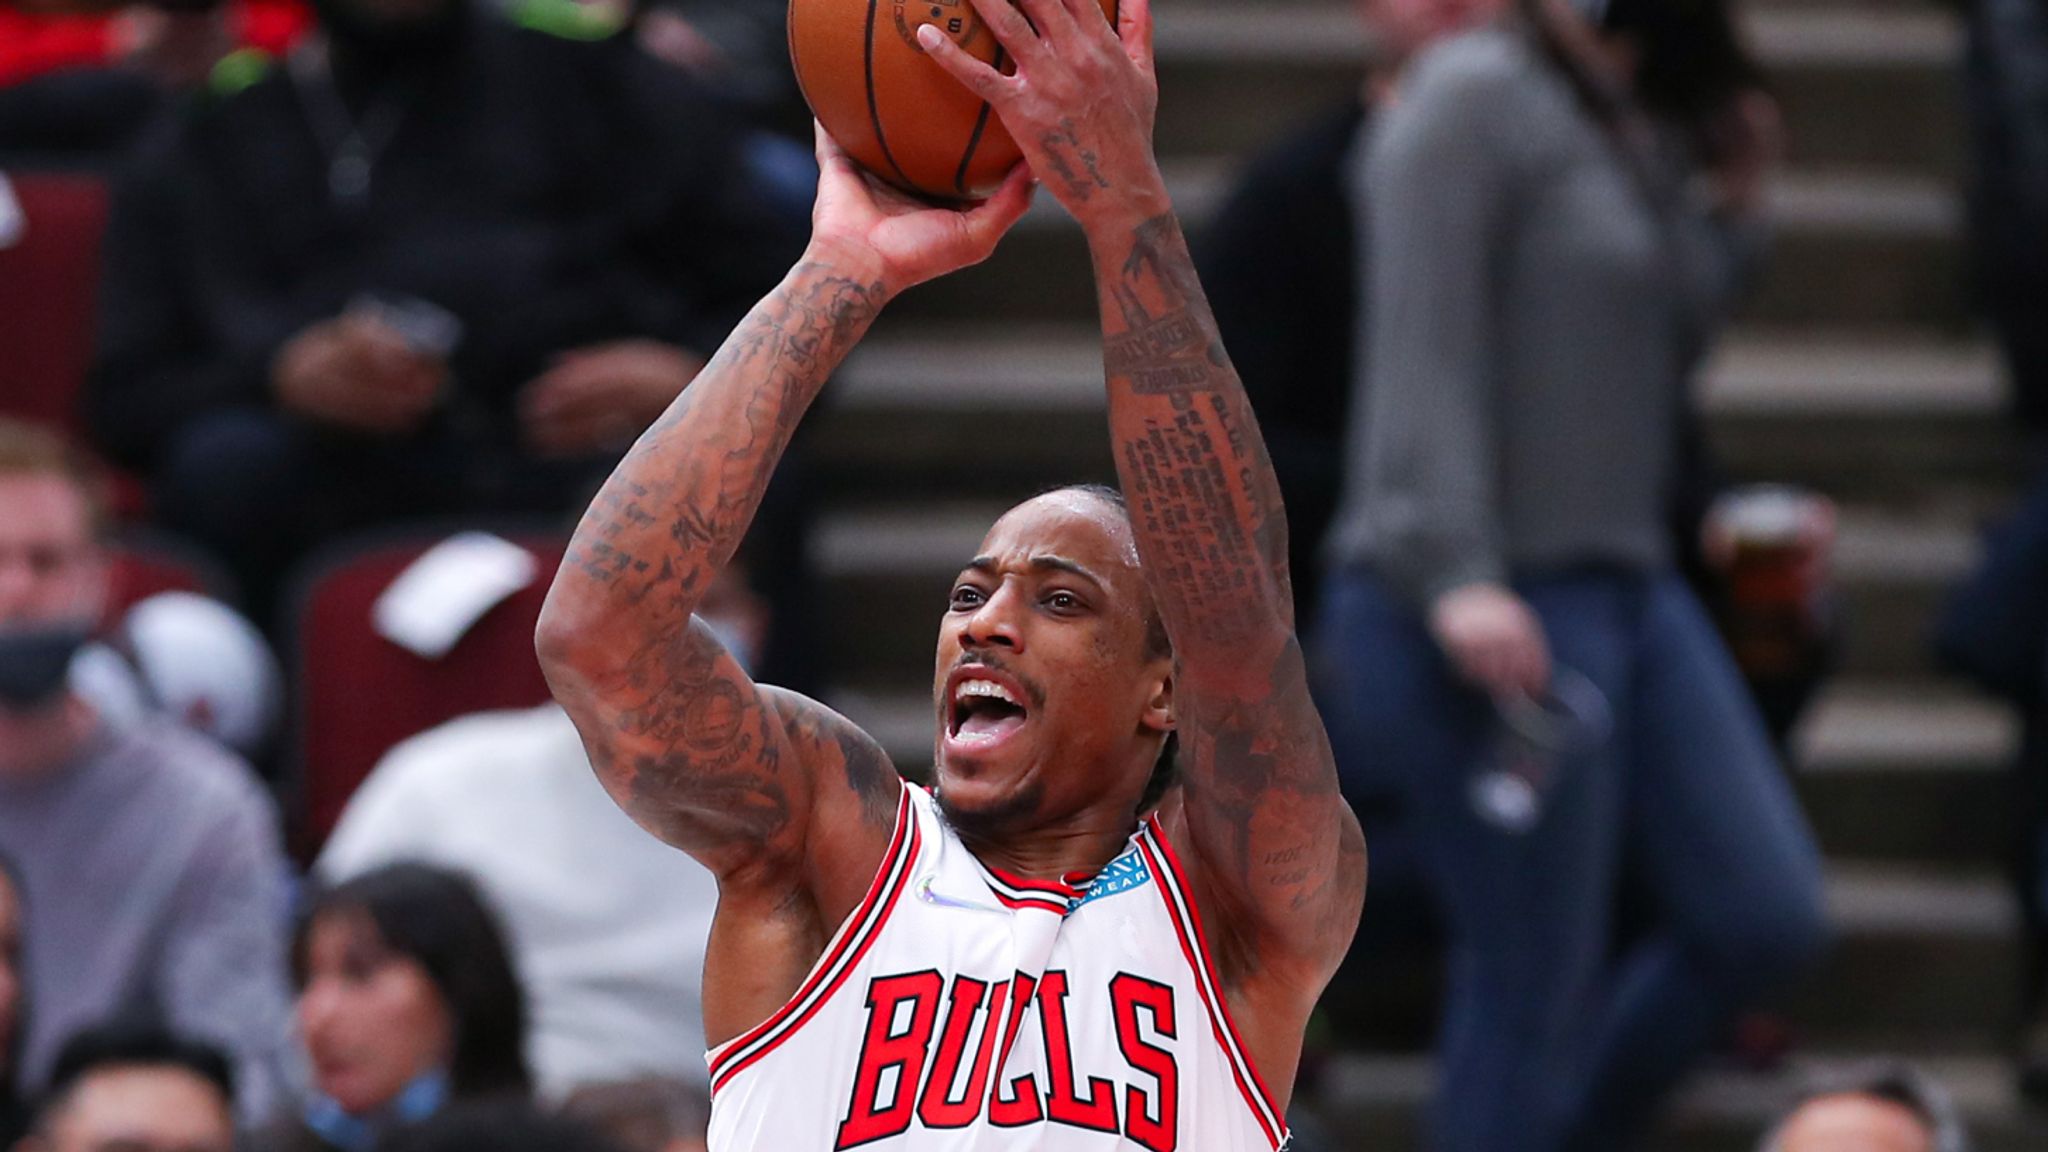 NBA: DeMar DeRozan continues historic run in Chicago Bulls' win; Seth Curry scores 23 on Nets debut